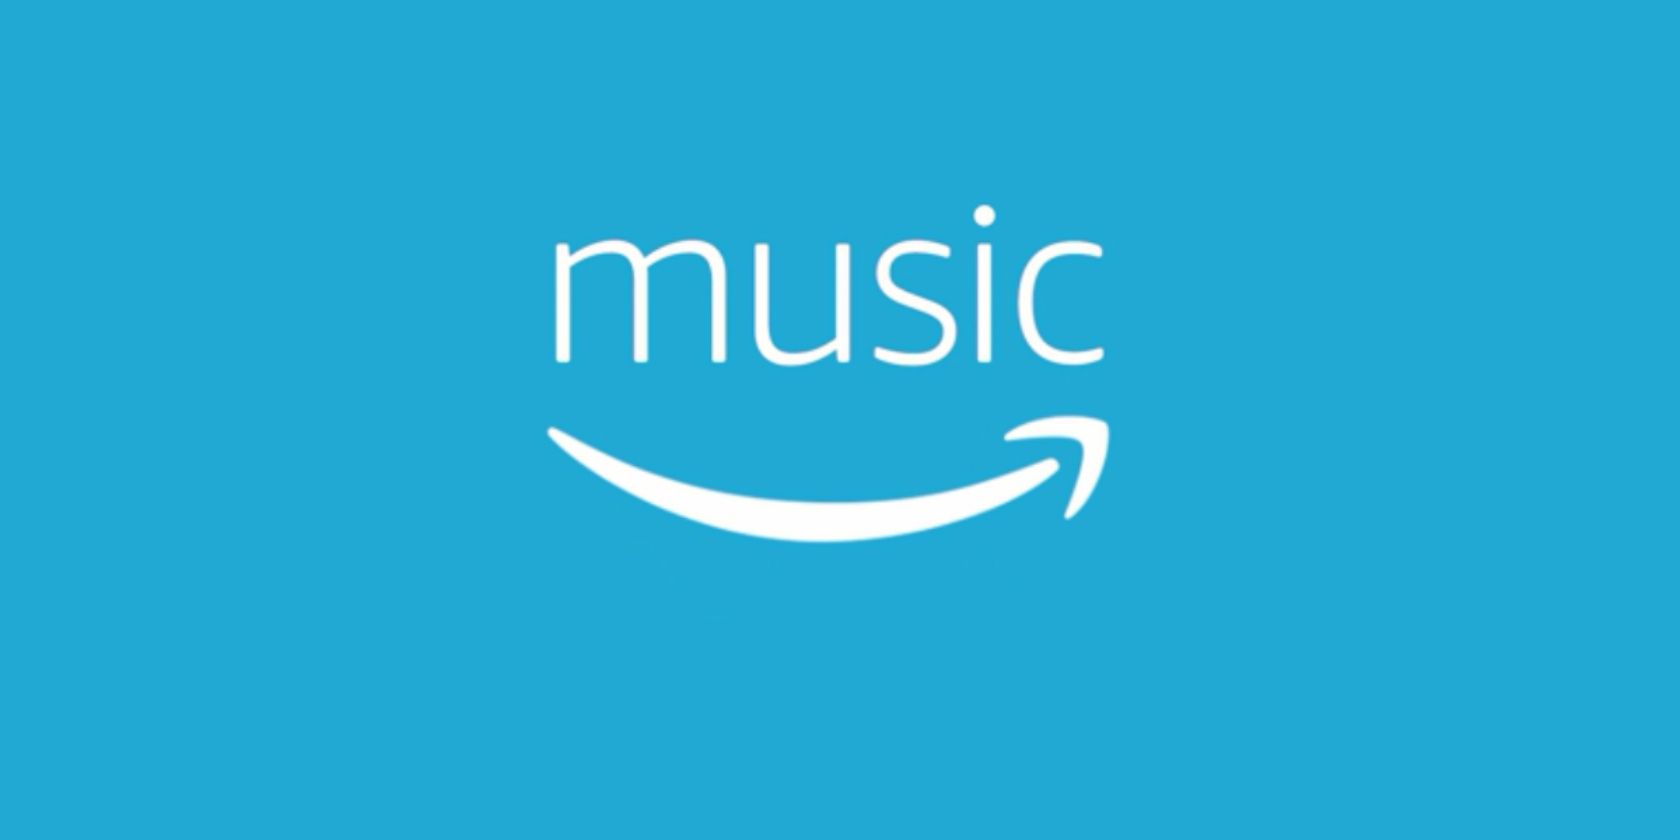 Amazon Launches Music Unlimited as a Spotify Killer